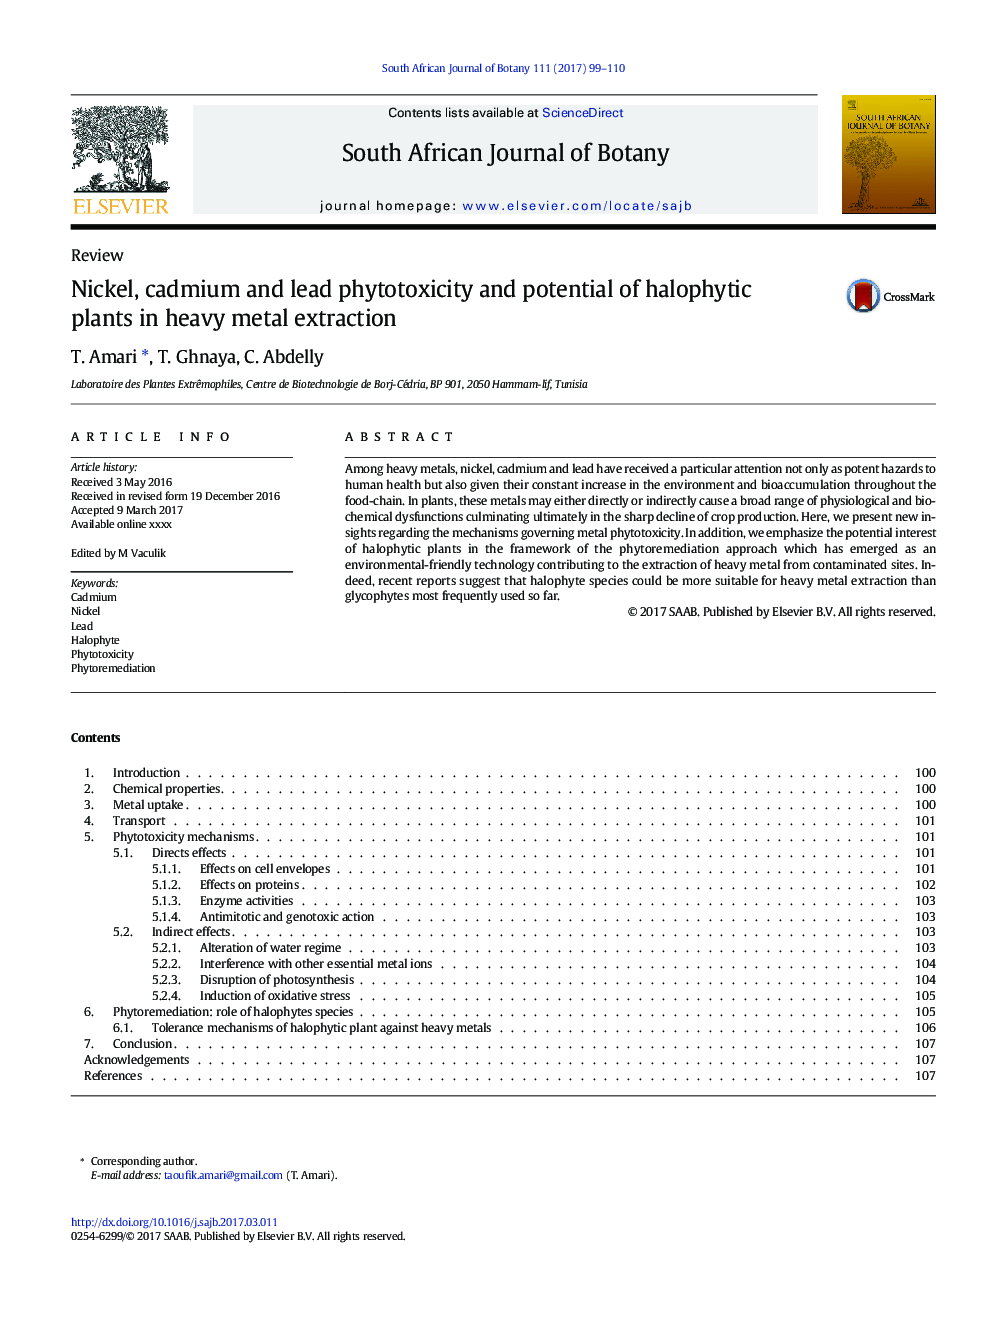 Nickel, cadmium and lead phytotoxicity and potential of halophytic plants in heavy metal extraction